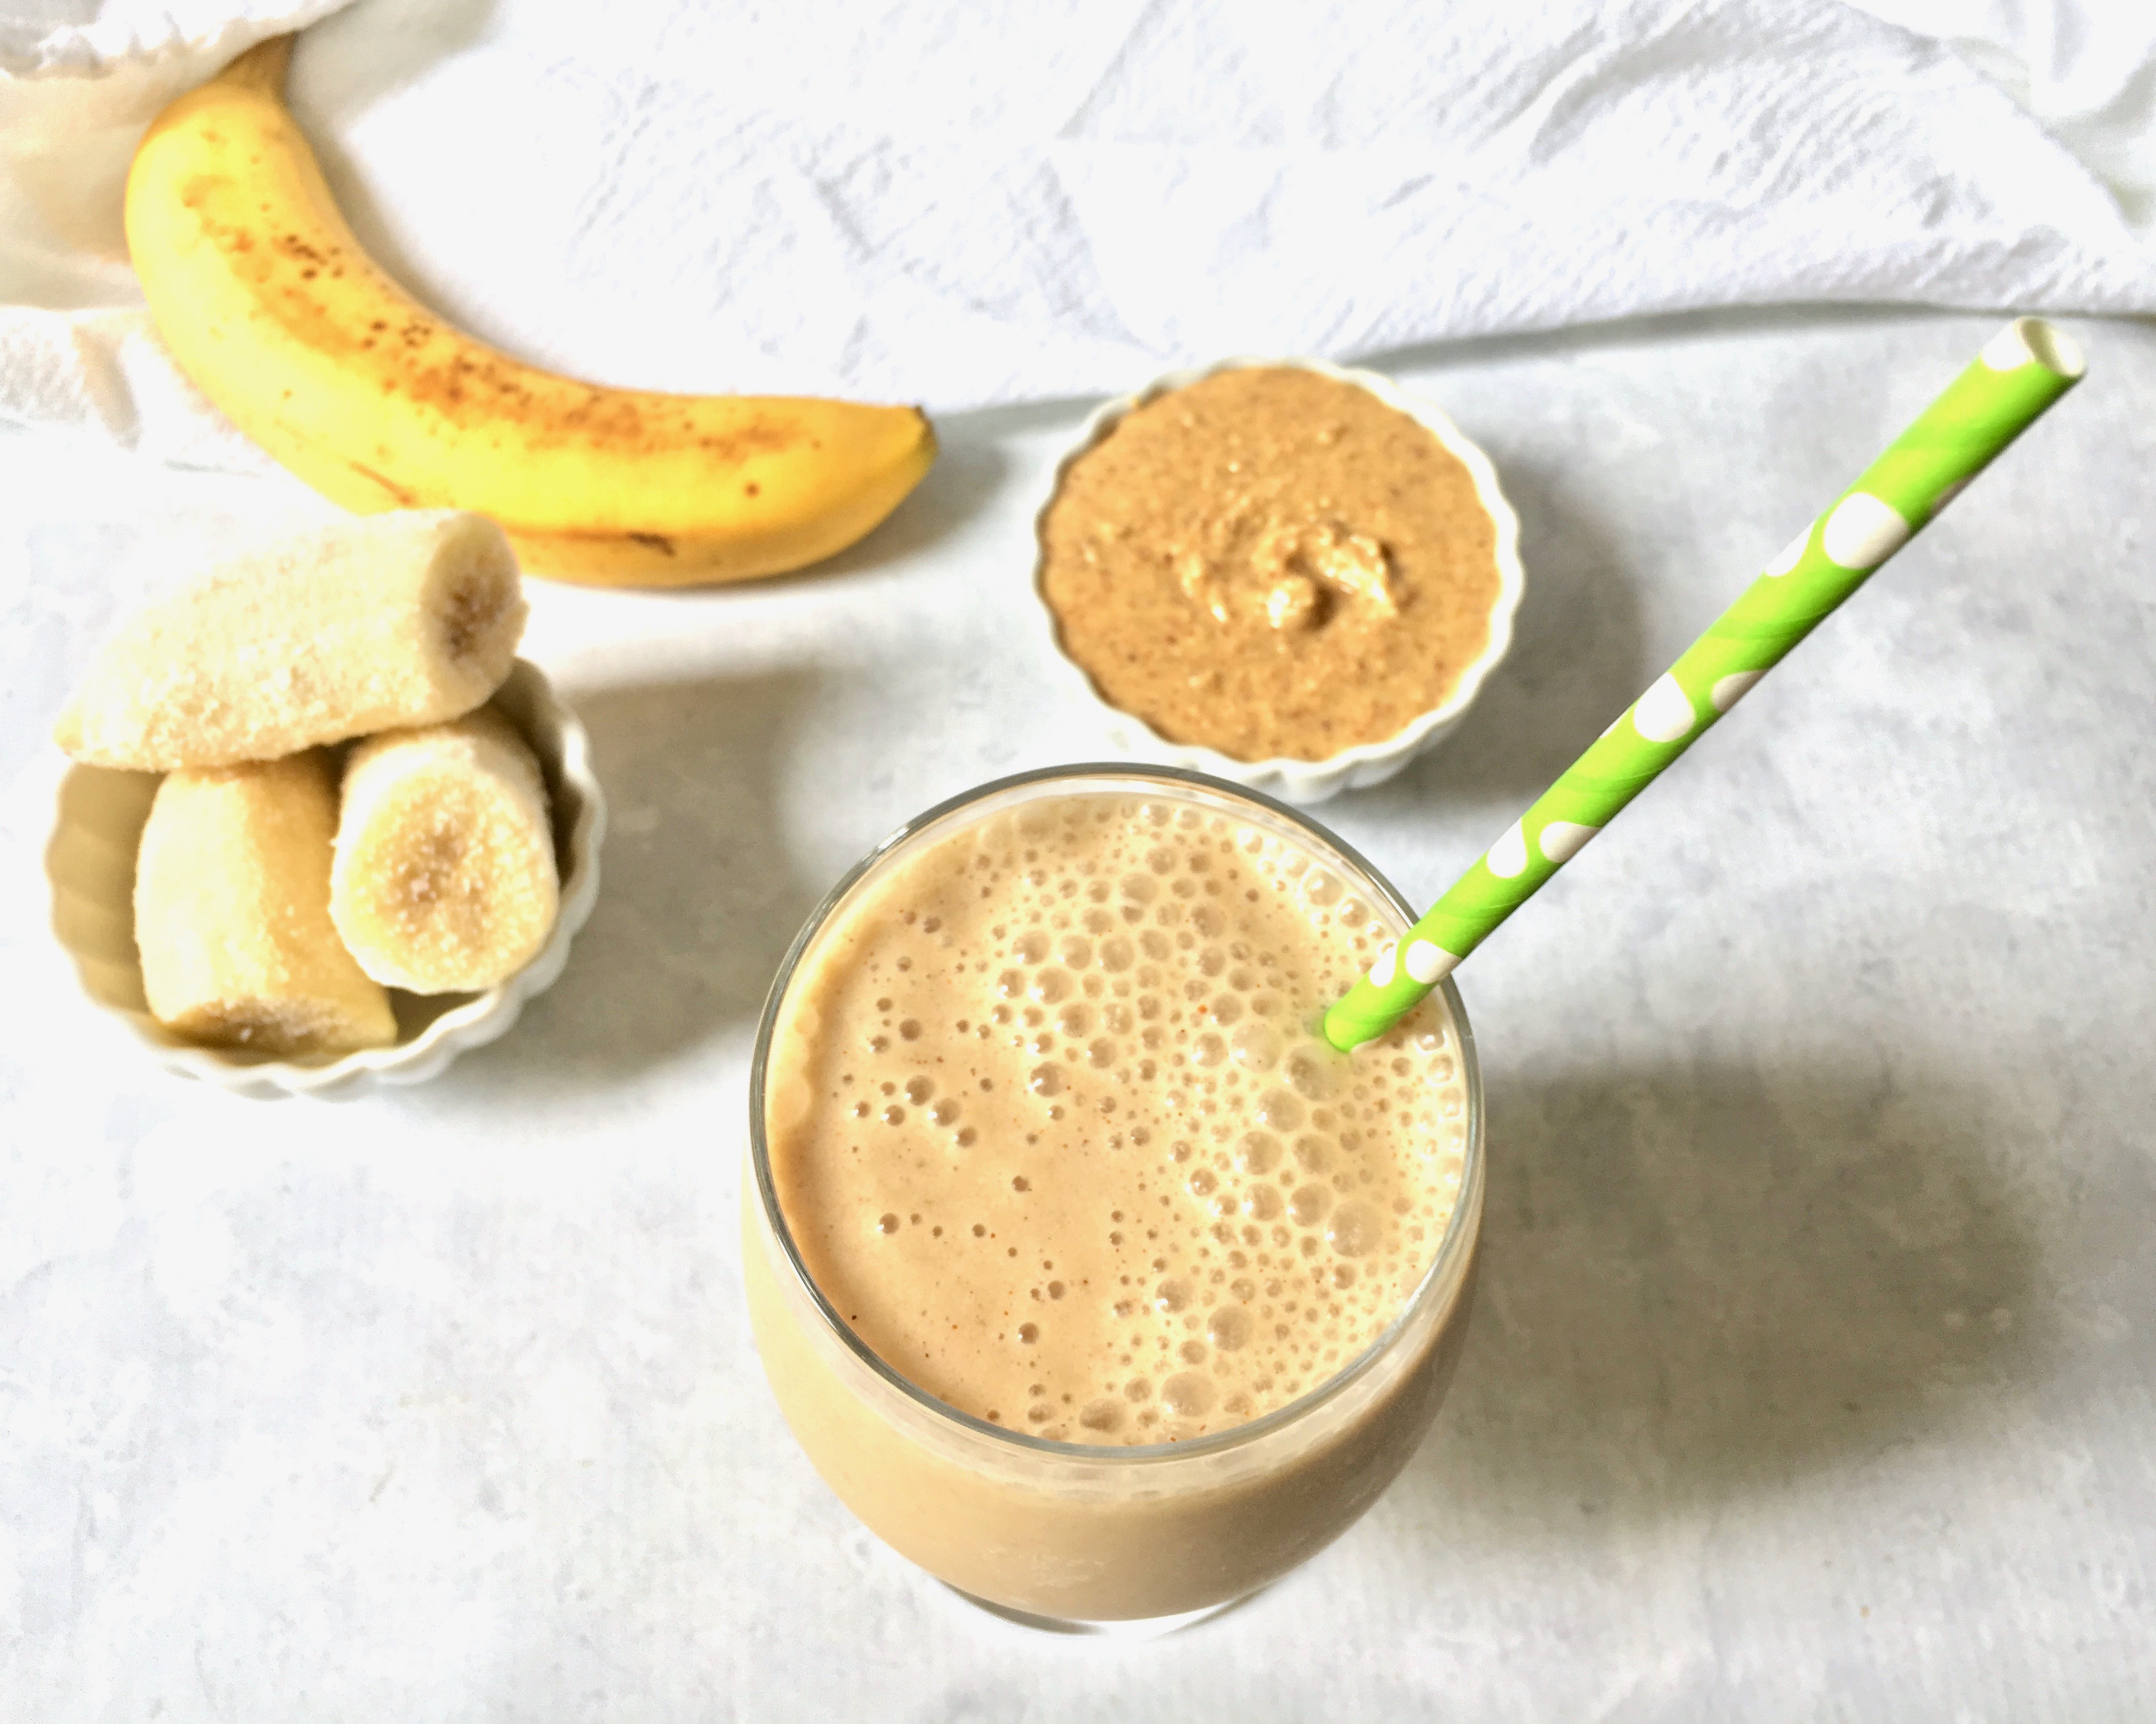 This Almond Butter and Banana Protein Smoothie is healthy, paleo and gluten-free.